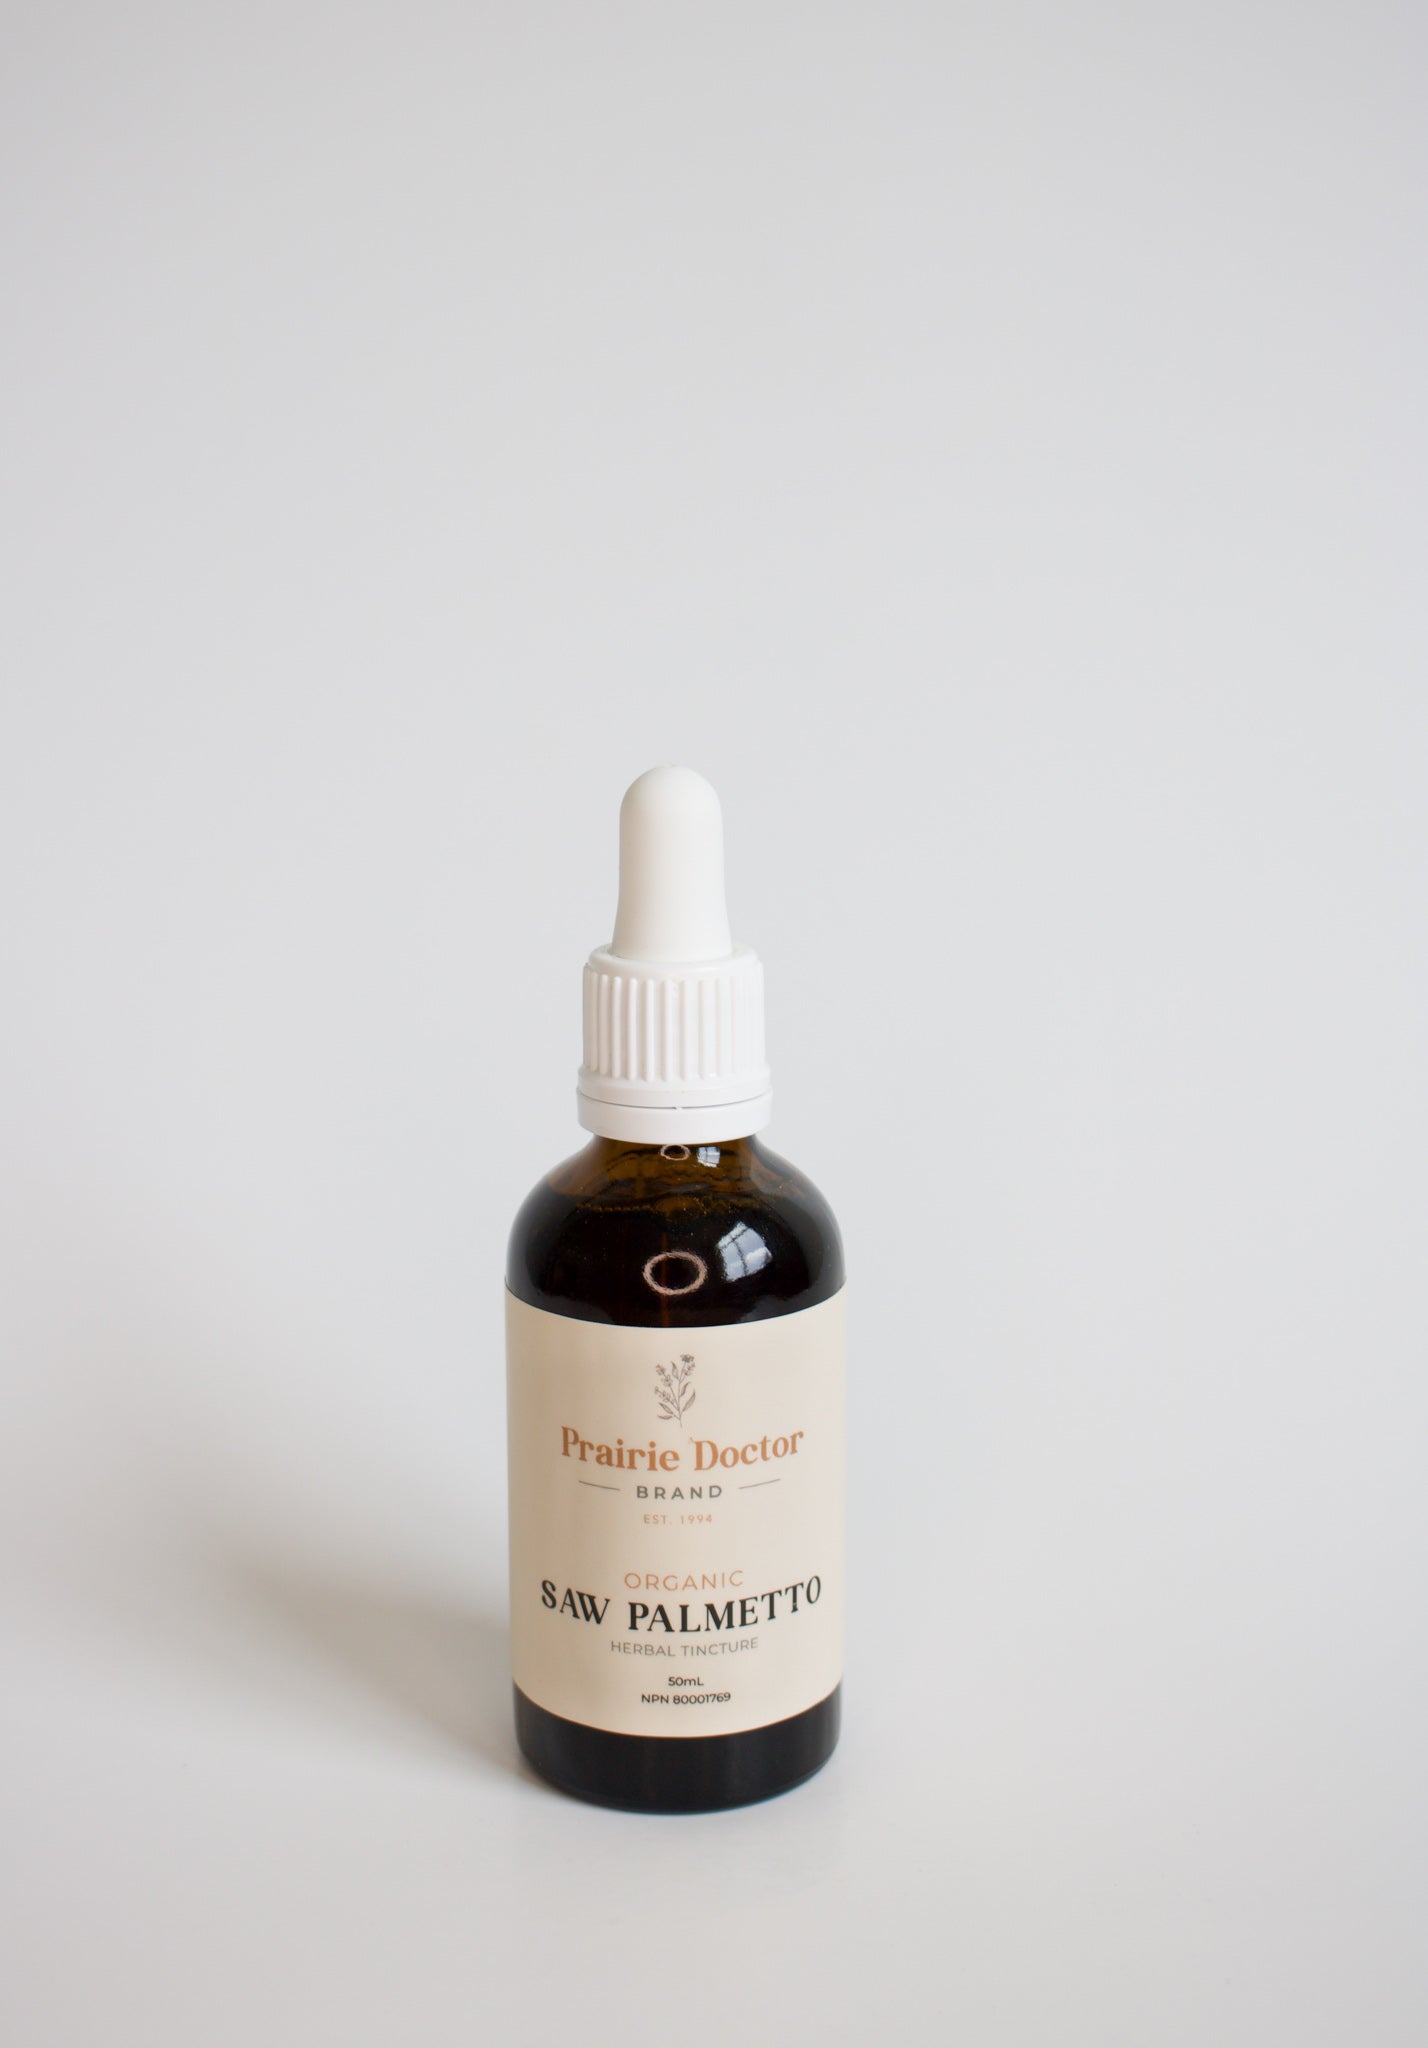 Our organic Saw Palmetto herbal tincture has been used in Herbal Medicine to help relieve the urologic symptoms associated with mild to moderate benign prostatic hyperplasia (BPH)